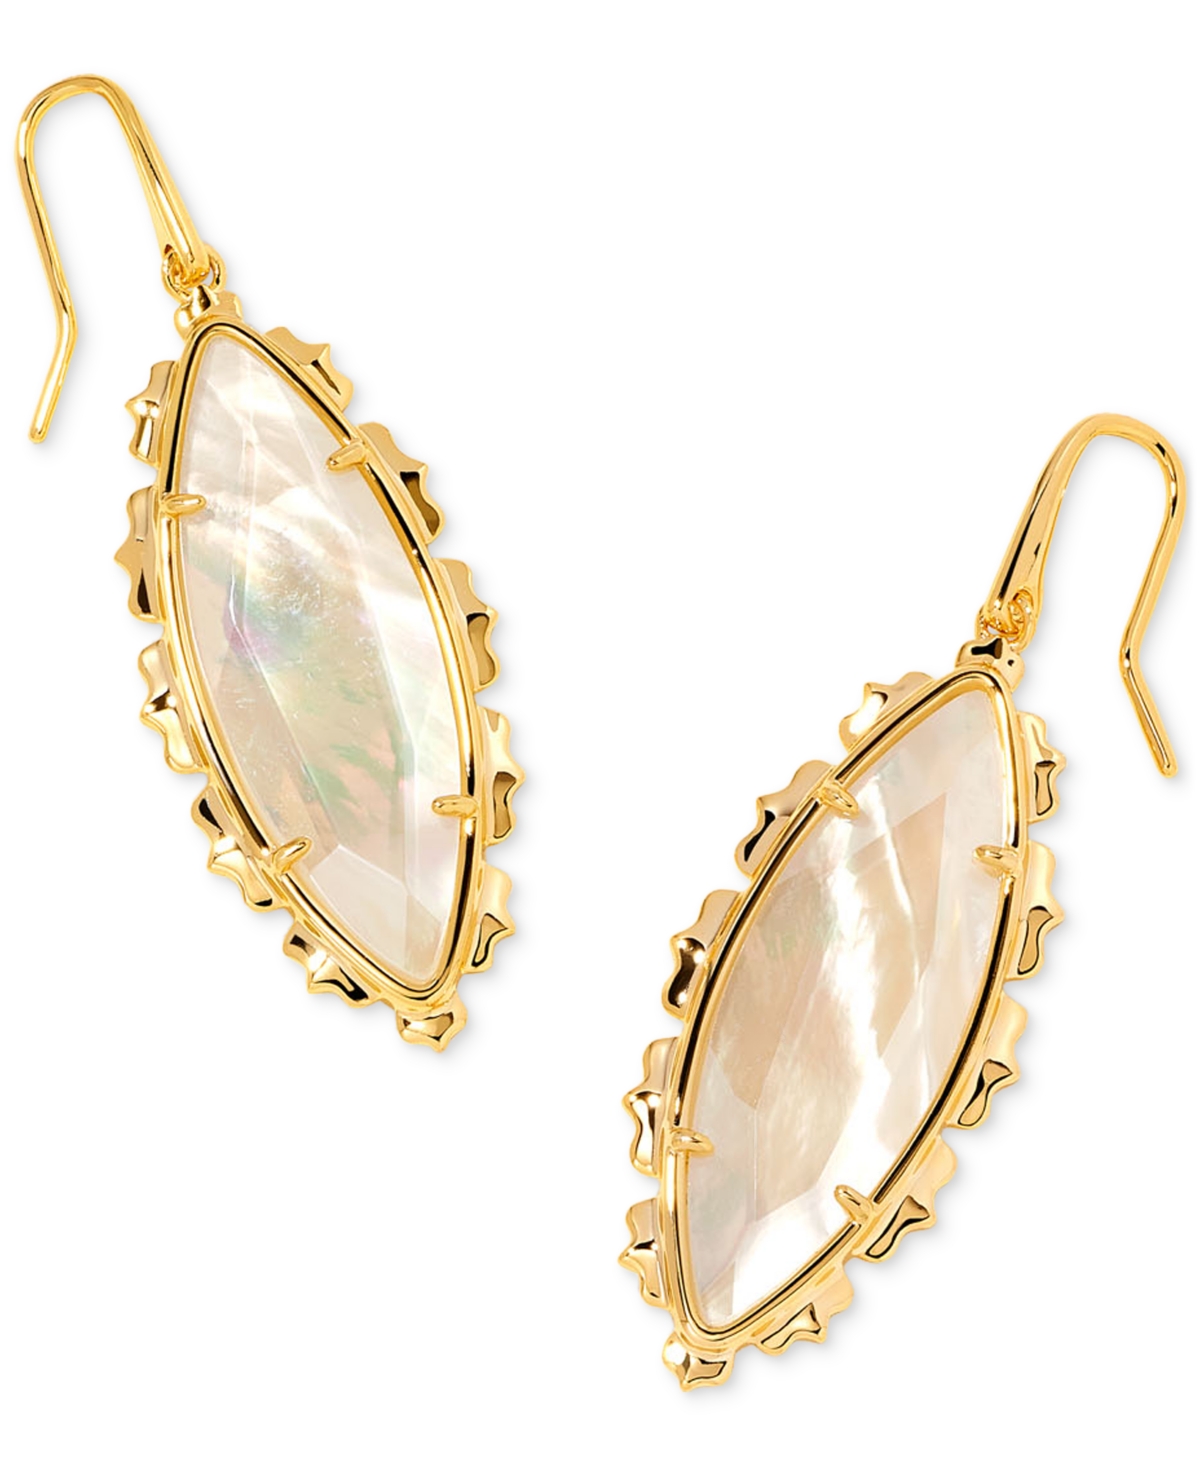 14K Abalone Marquise Drop Earrings (Also in Mother of Pearl & Pink Cat's Eye Glass) - Abalone